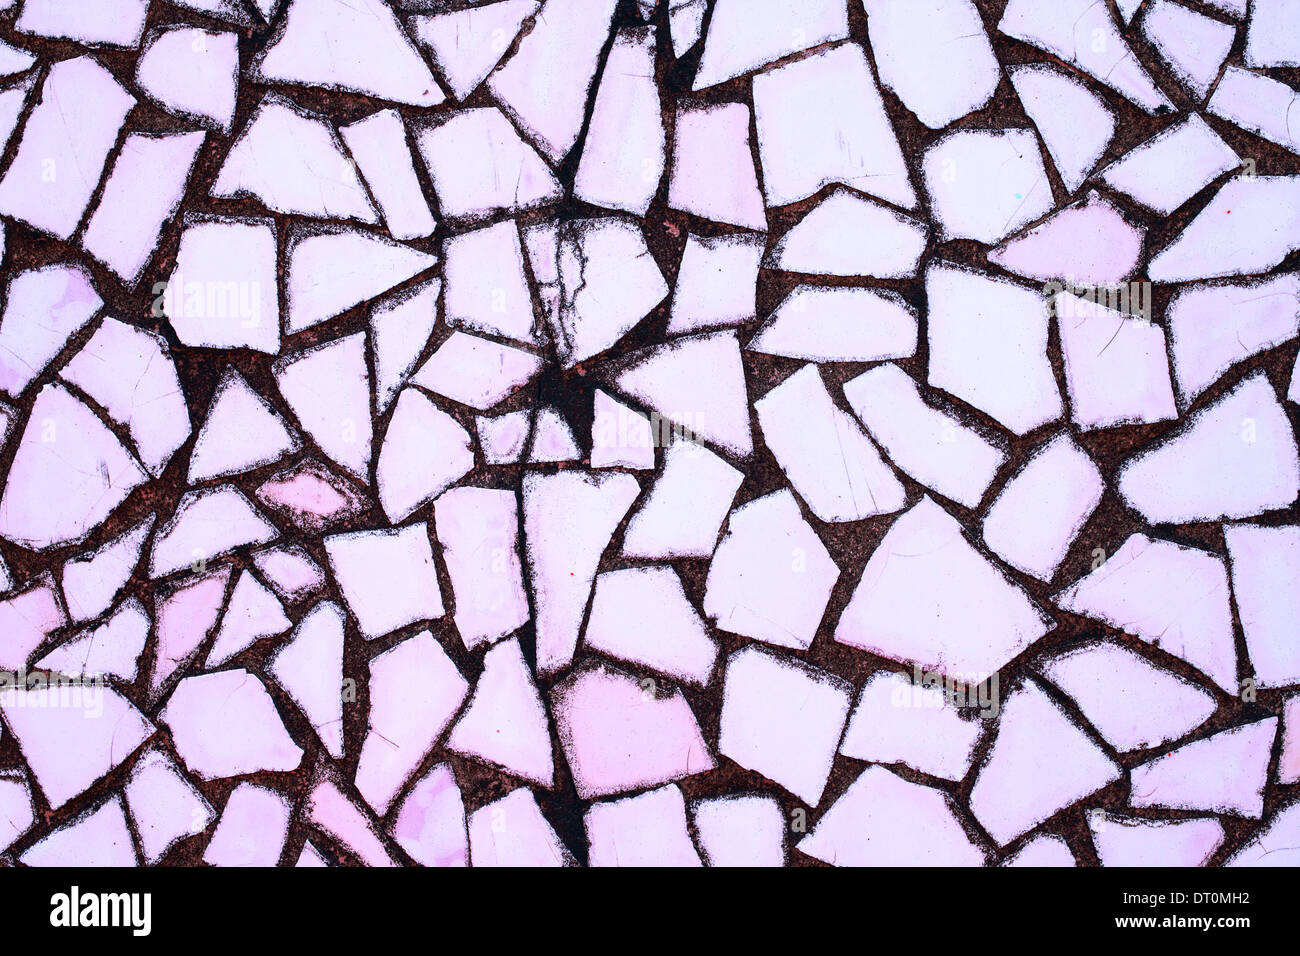 Texture of stone wall with mosaic tiles close-up Stock Photo